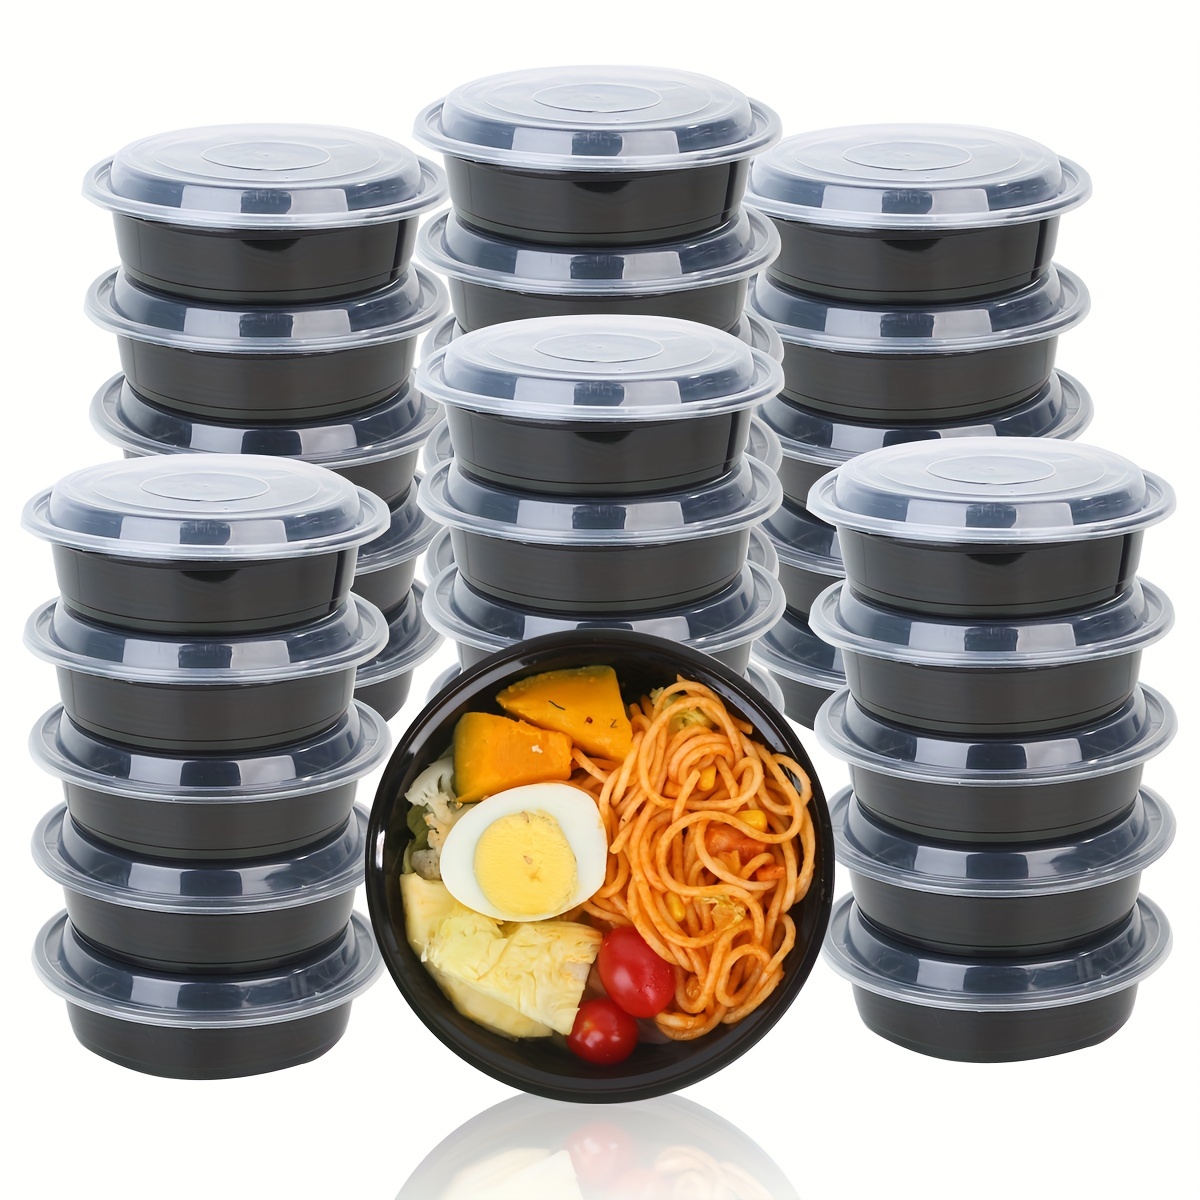 [50 Sets] 24 oz. Meal Prep Containers with Lids, Round Lunch Containers, Bento Boxes, Food Storage Containers